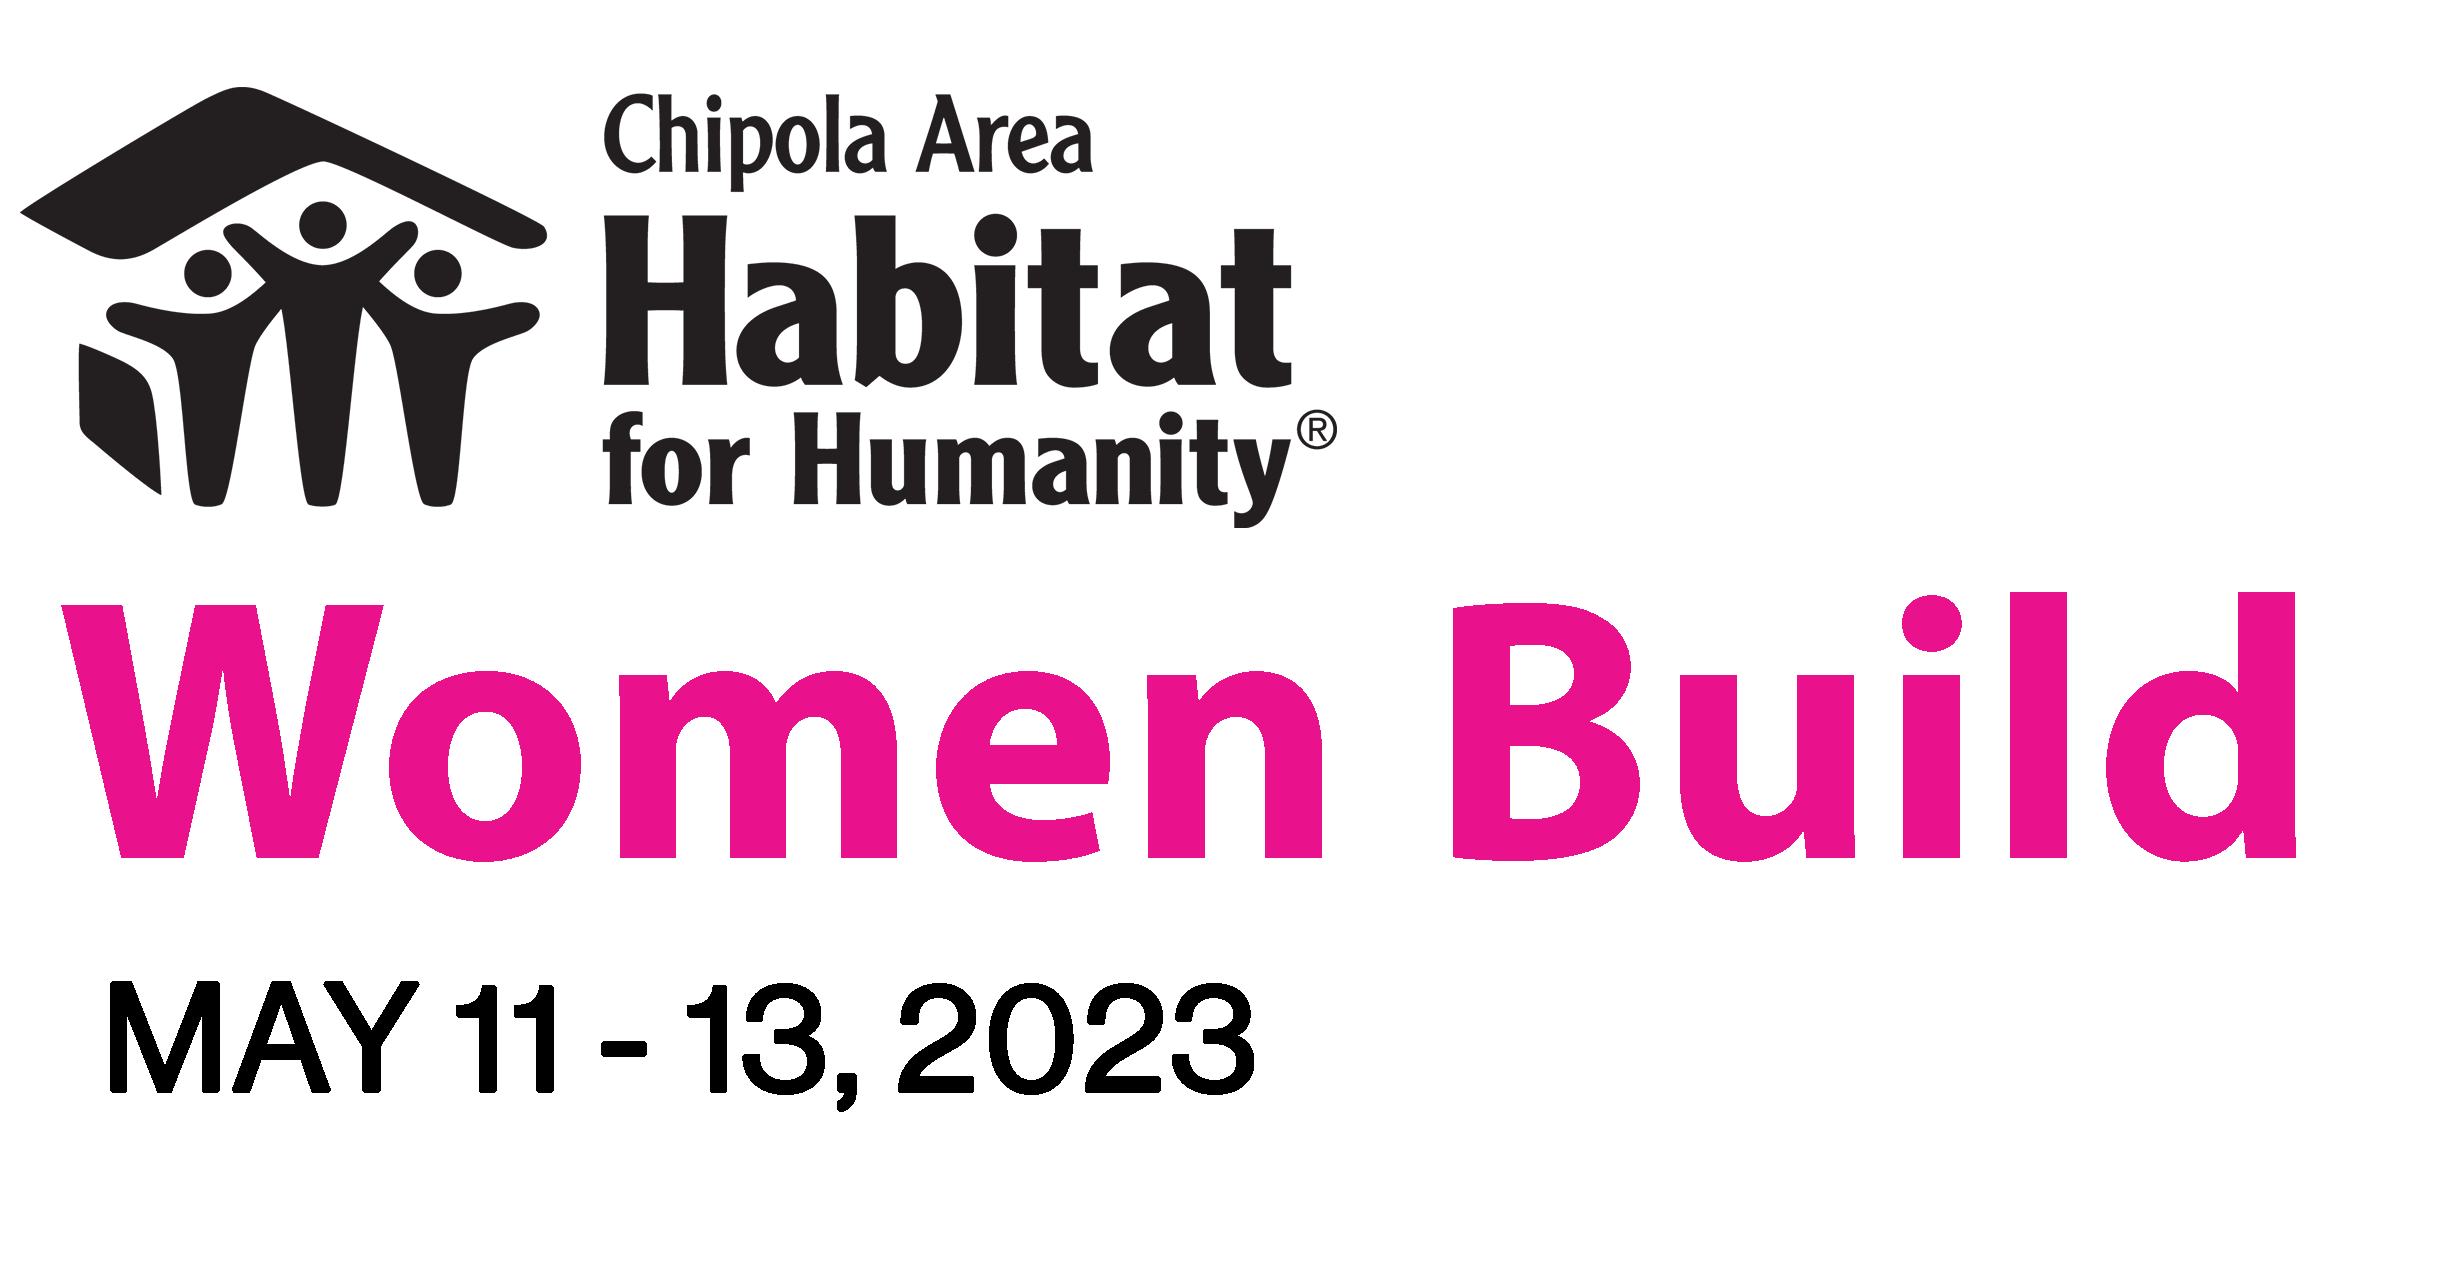 A text based logo that reads: Chipola Area Habitat for Humanity Women Build May 11 through 13 2023.